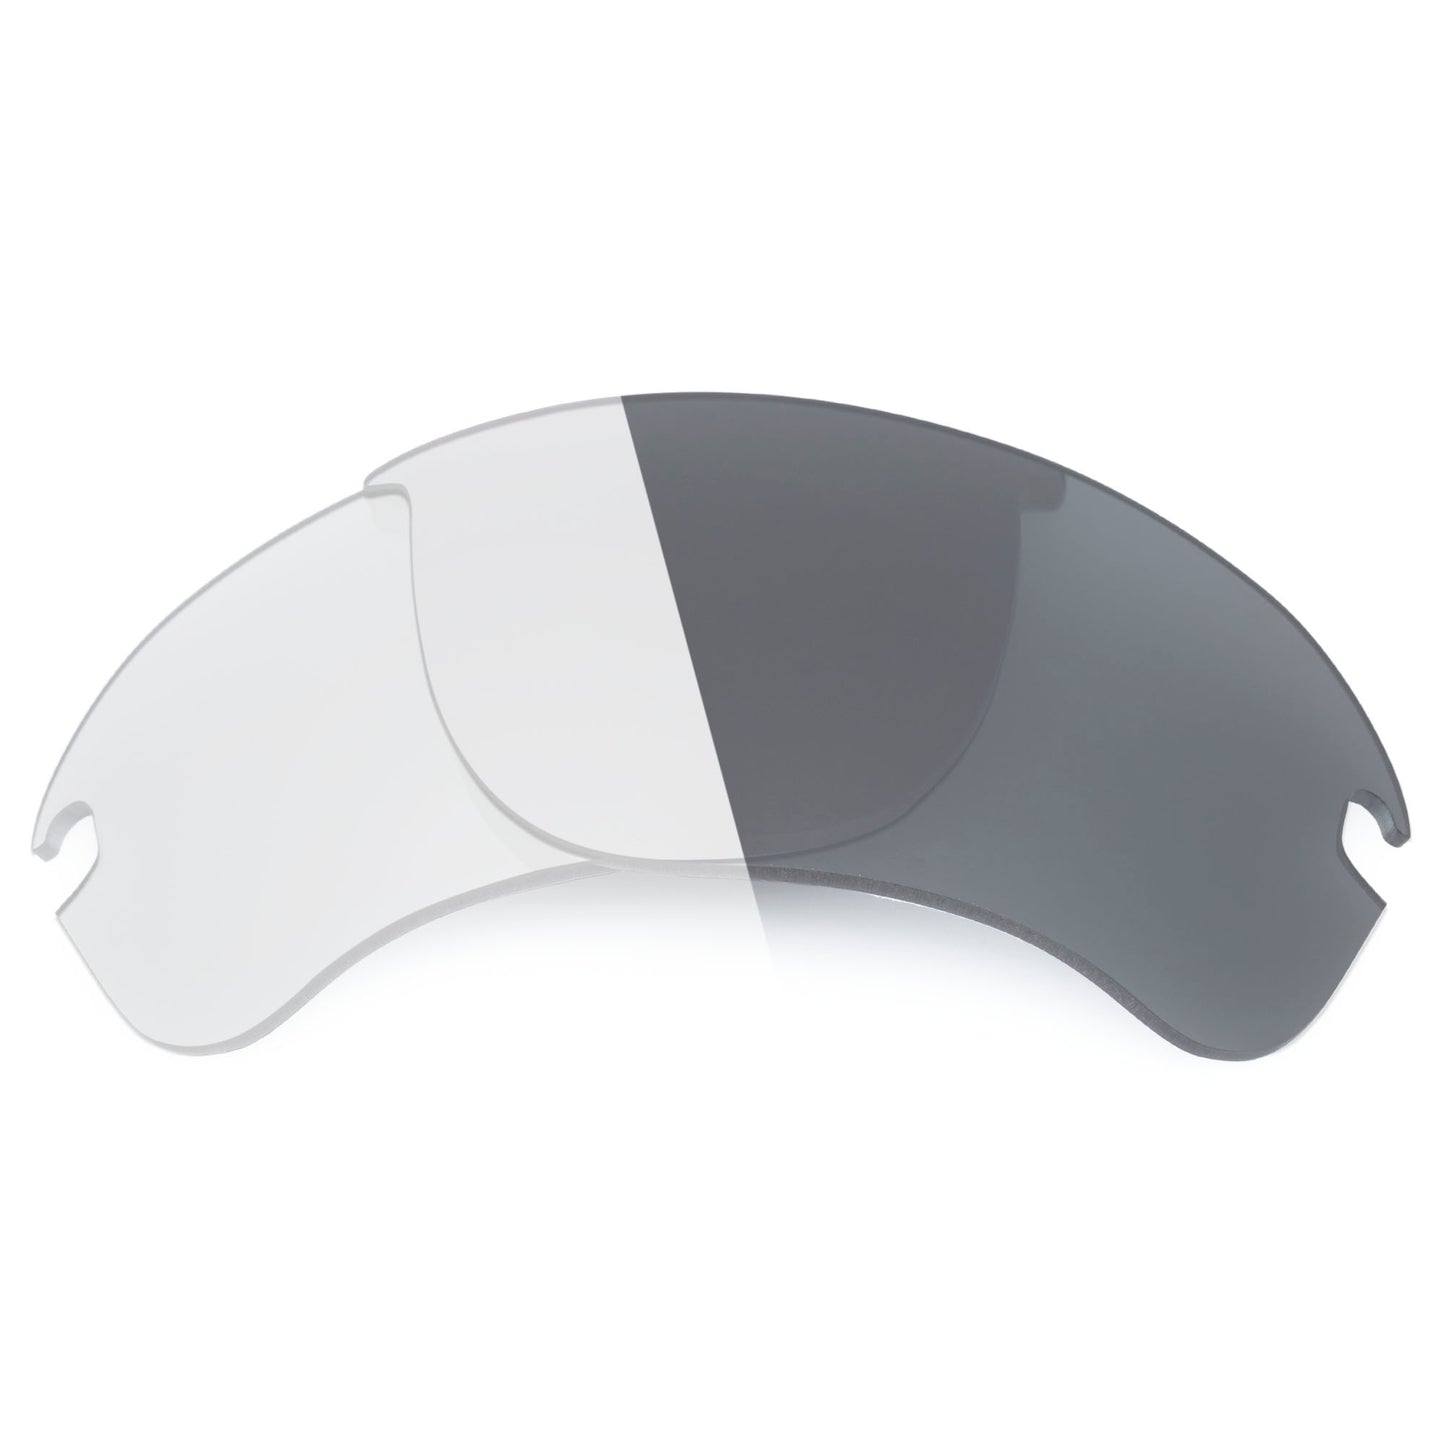 Revant replacement lenses for Oakley Flak Draft (Exclusive Shape) Non-Polarized Adapt Gray Photochromic